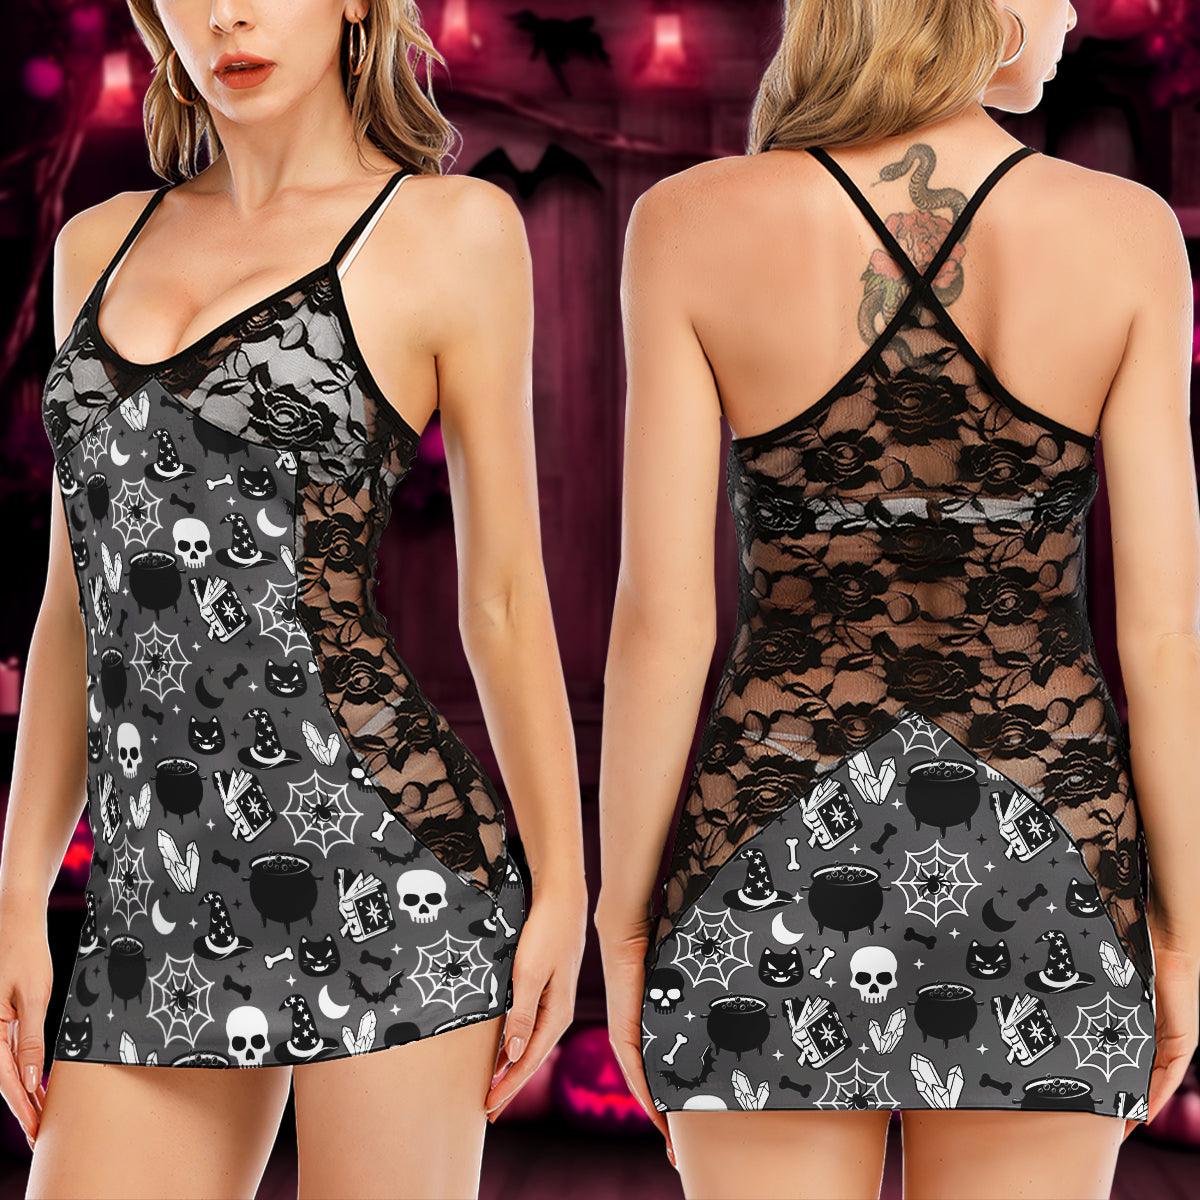 Witchy Skull Gothic Women's Black Lace Babydolls Nightgowns | Women Sleepwear Babydoll, Nightgowns